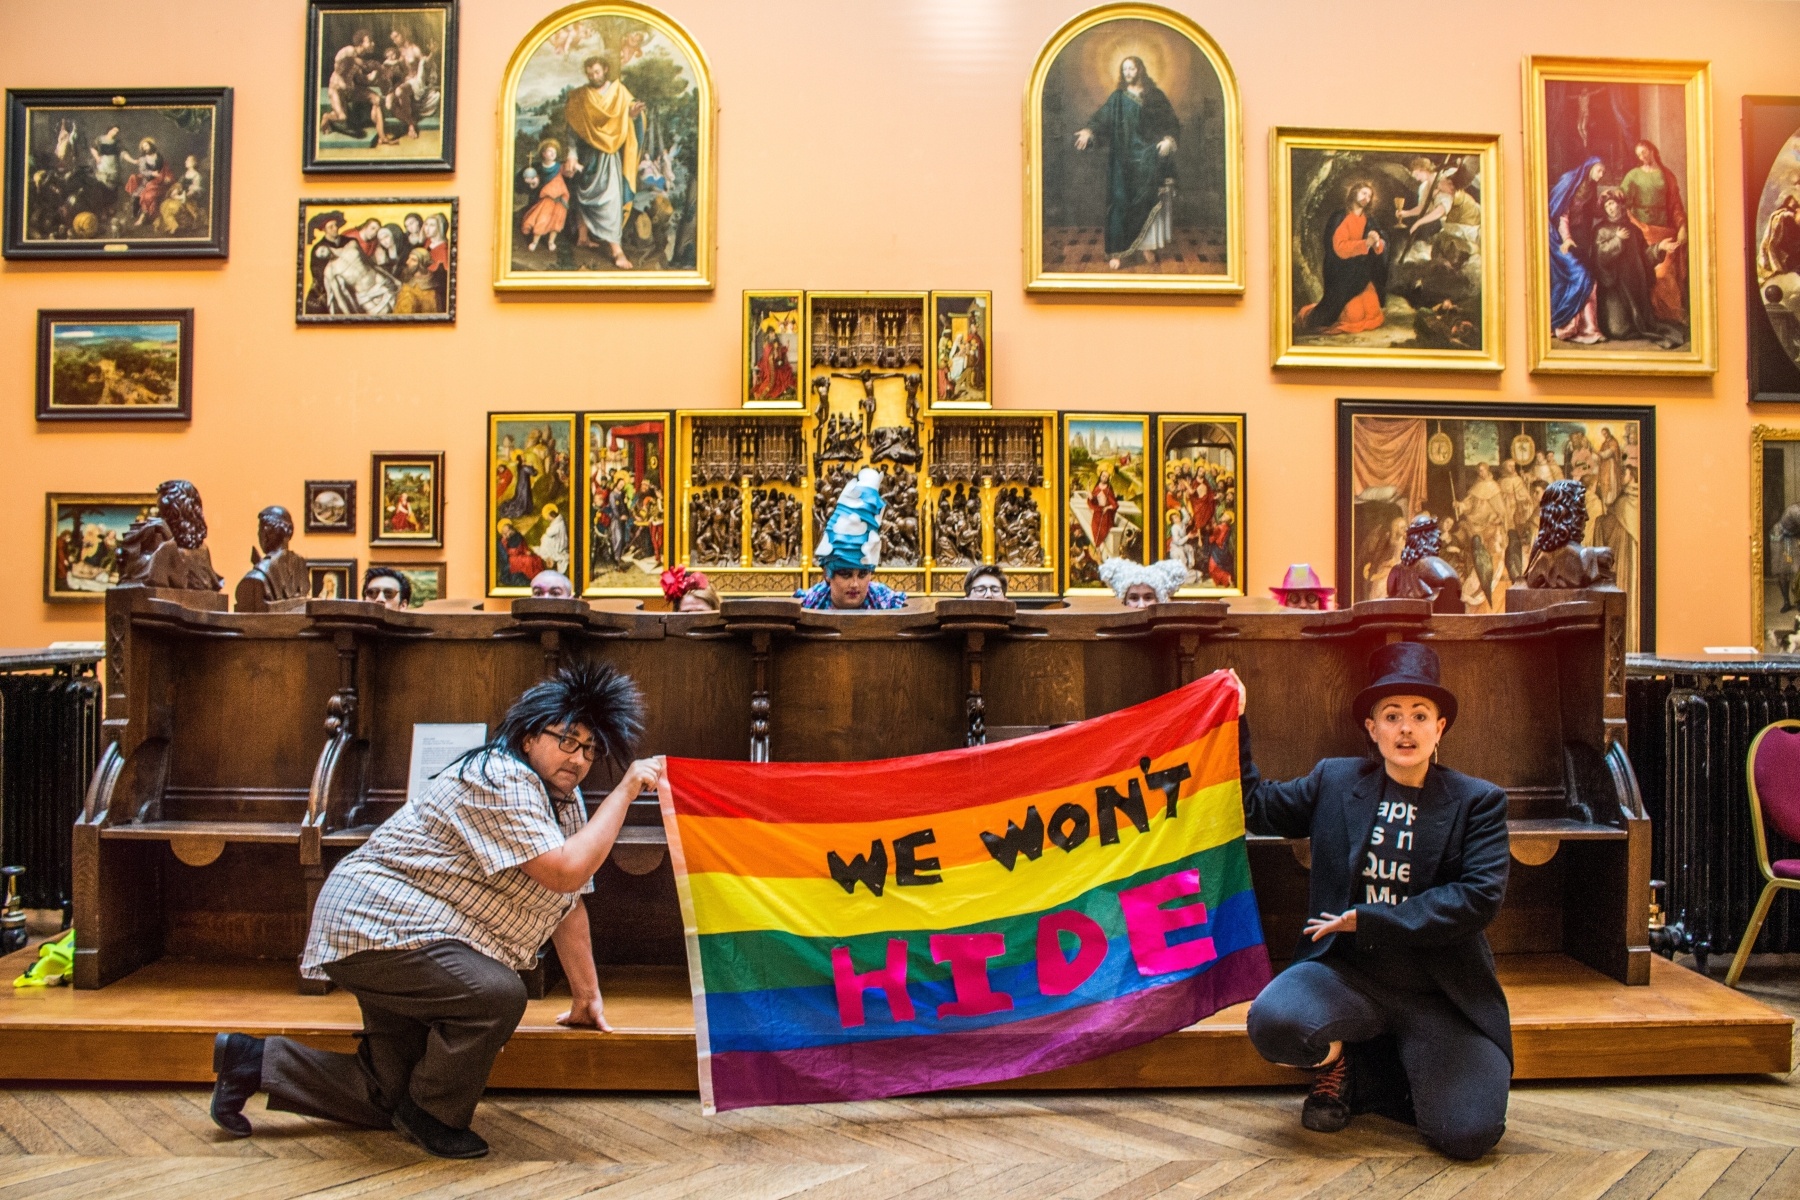 9 drag performers of various ages, genders and ethnicities pose in a large museum room with religious paintings on the walls. 7 of the performers are hiding behind an ornate wooden structure in the centre of the room, with only their heads showing. 2 of the performers keel in front of the structure holding a rainbow flag into which the following text has been sewn in black and pink lettering "We Won't Hide"